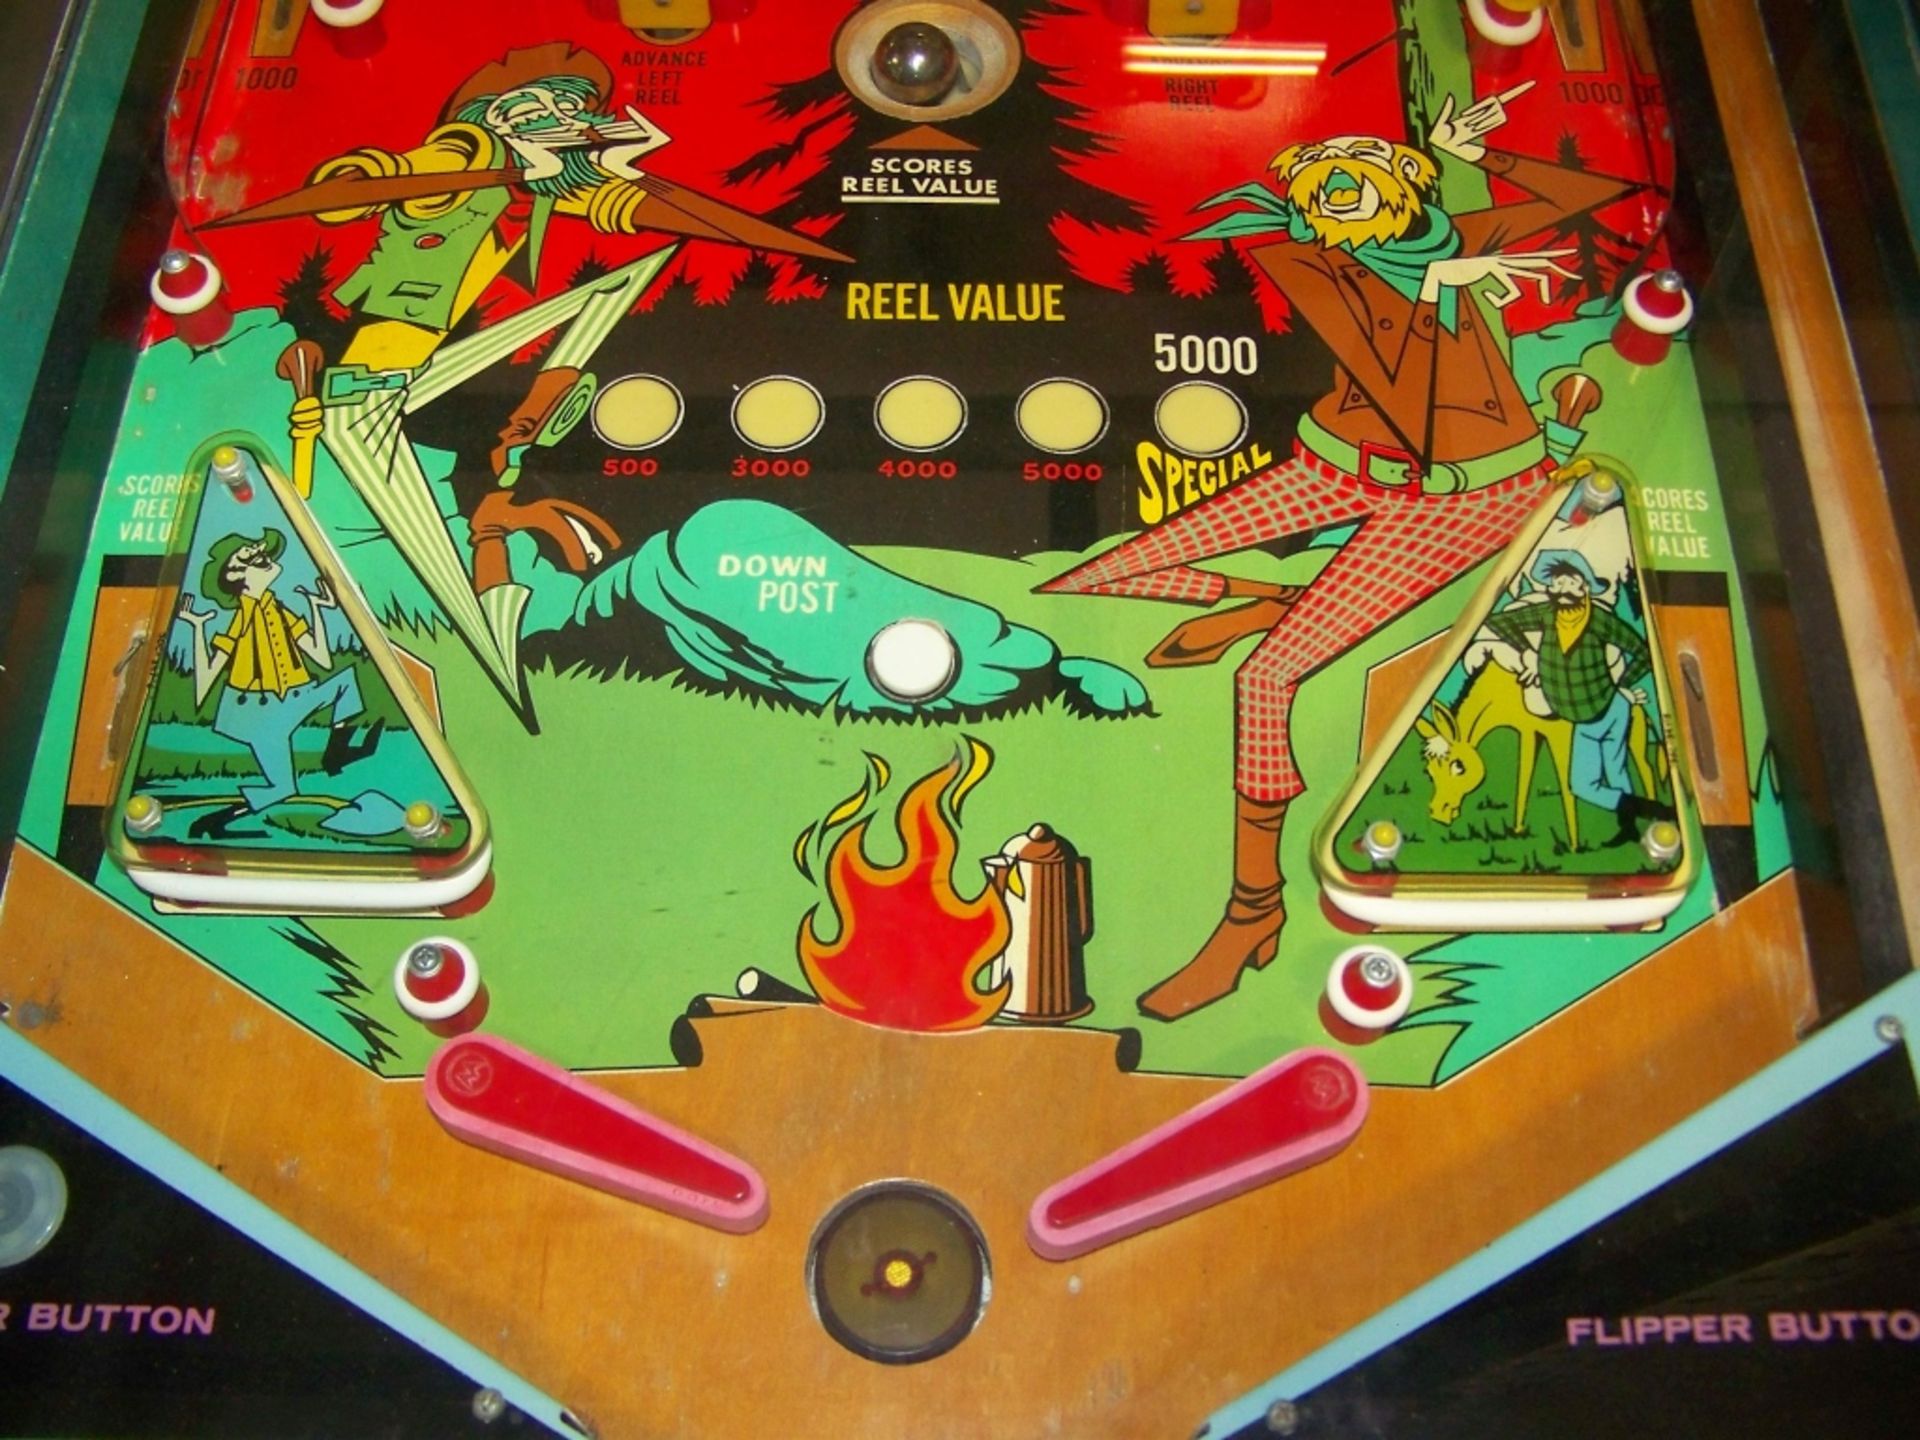 KLONDIKE PINBALL MACHINE WILLIAMS 1971 Item is in used condition. Evidence of wear and commercial - Image 4 of 5